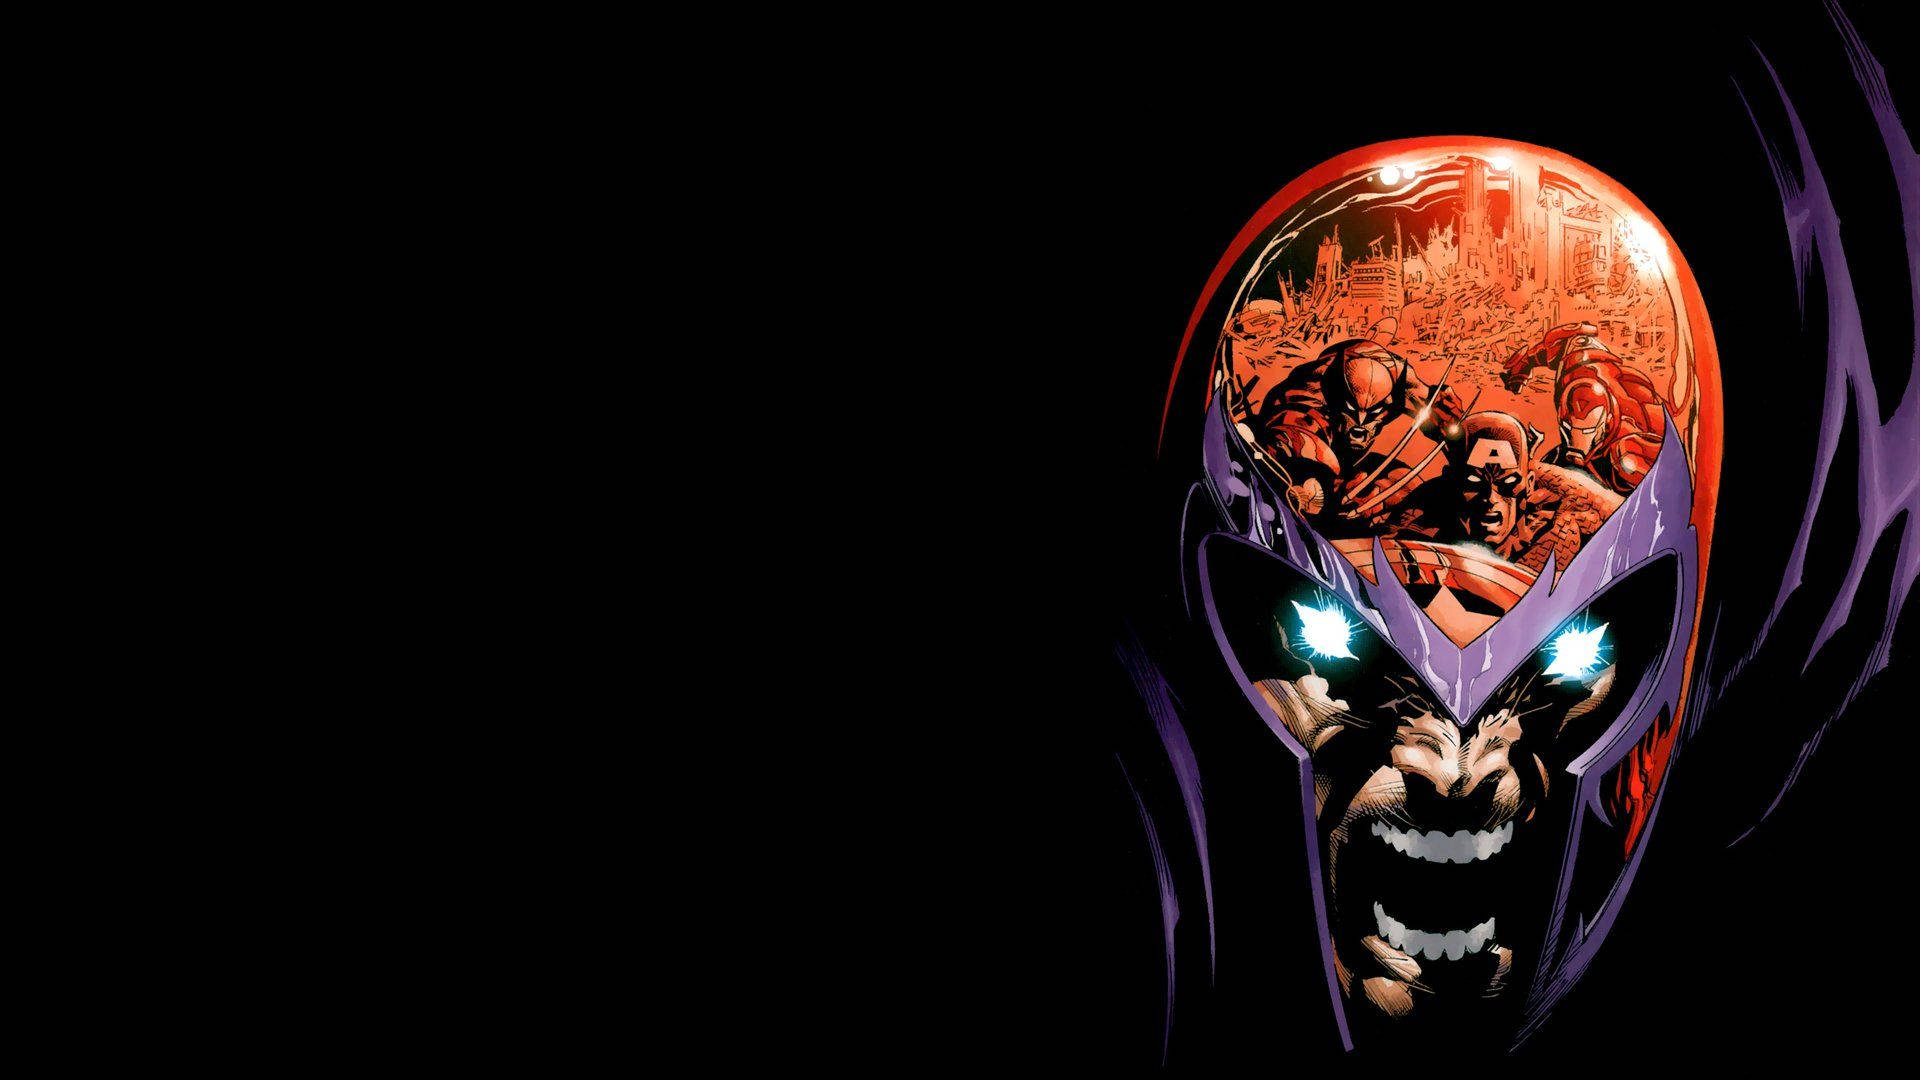 Captivating image of Magneto in Action Wallpaper